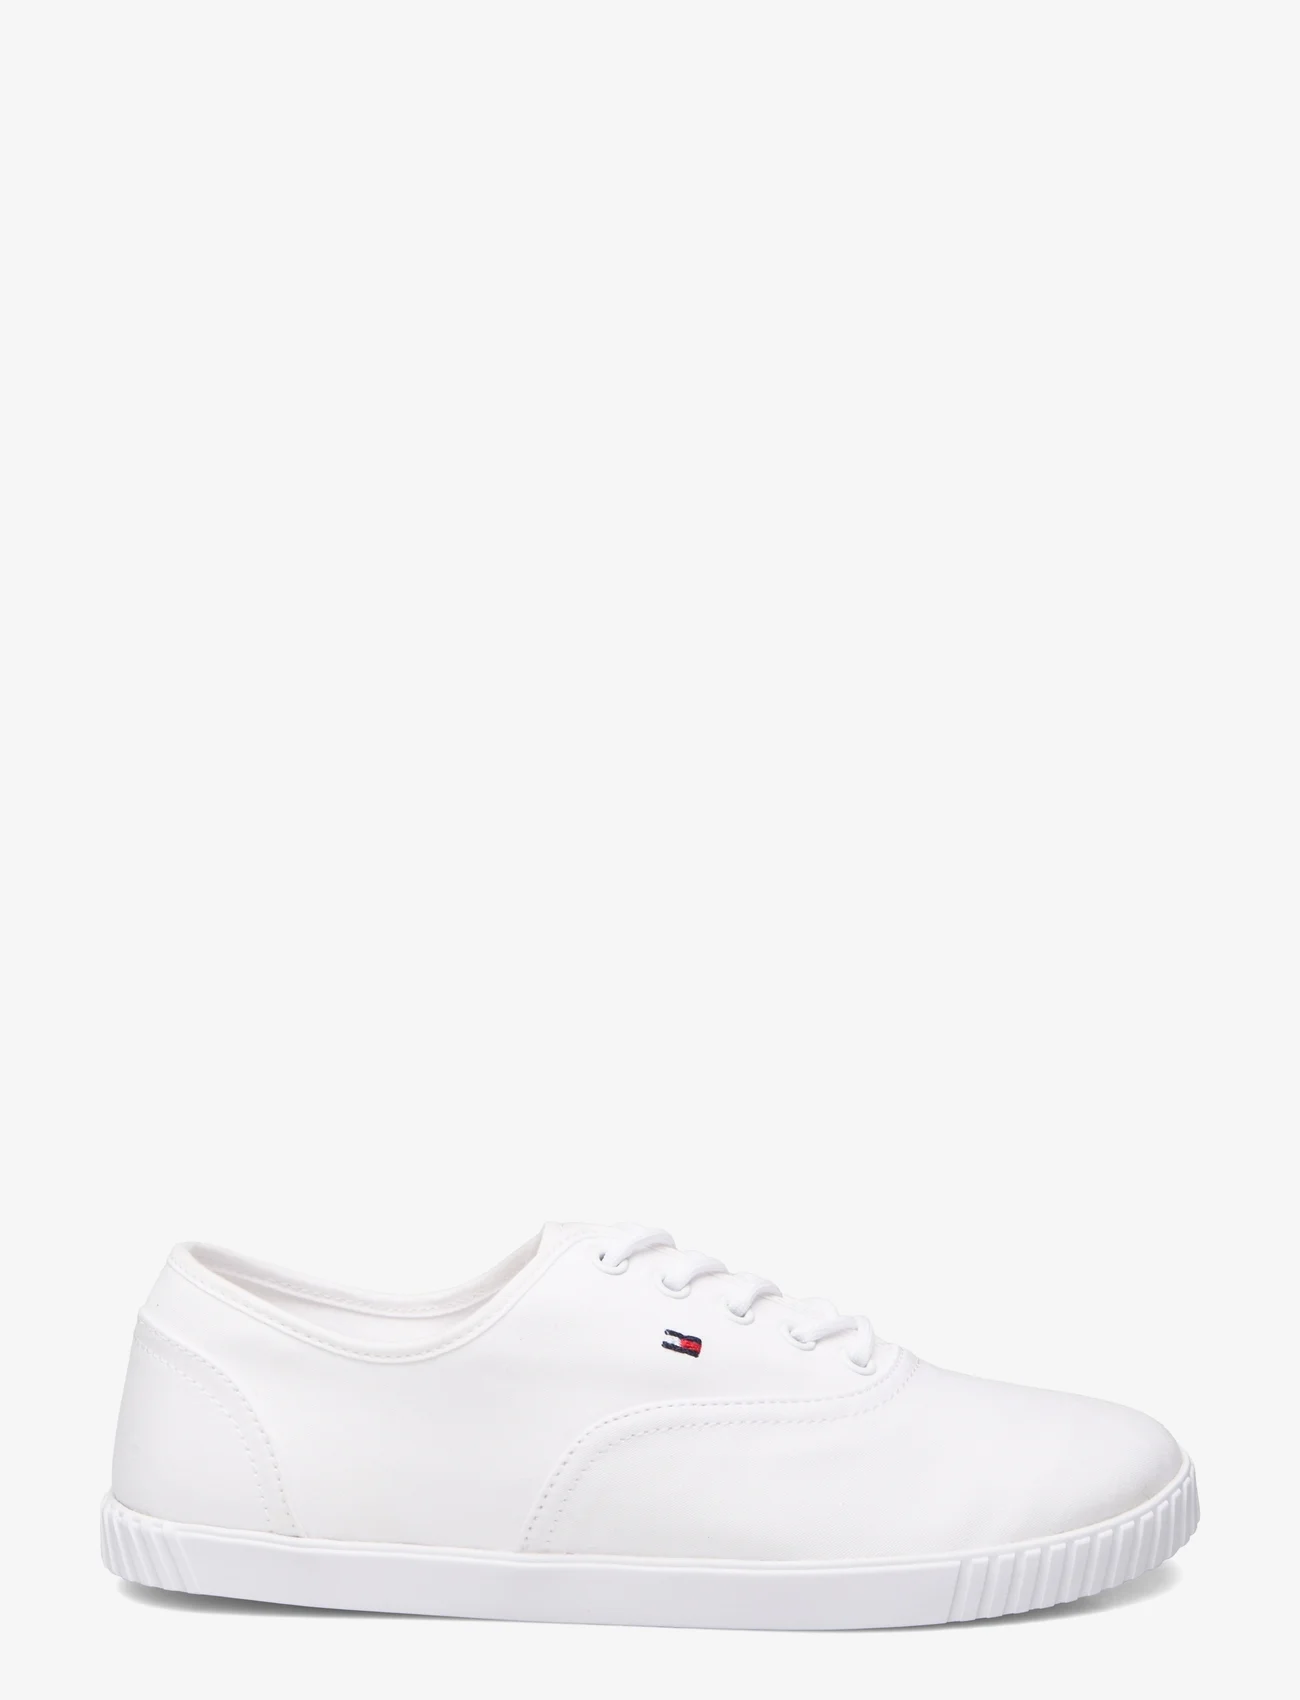 Tommy Hilfiger - CANVAS LACE UP SNEAKER - låga sneakers - white - 1